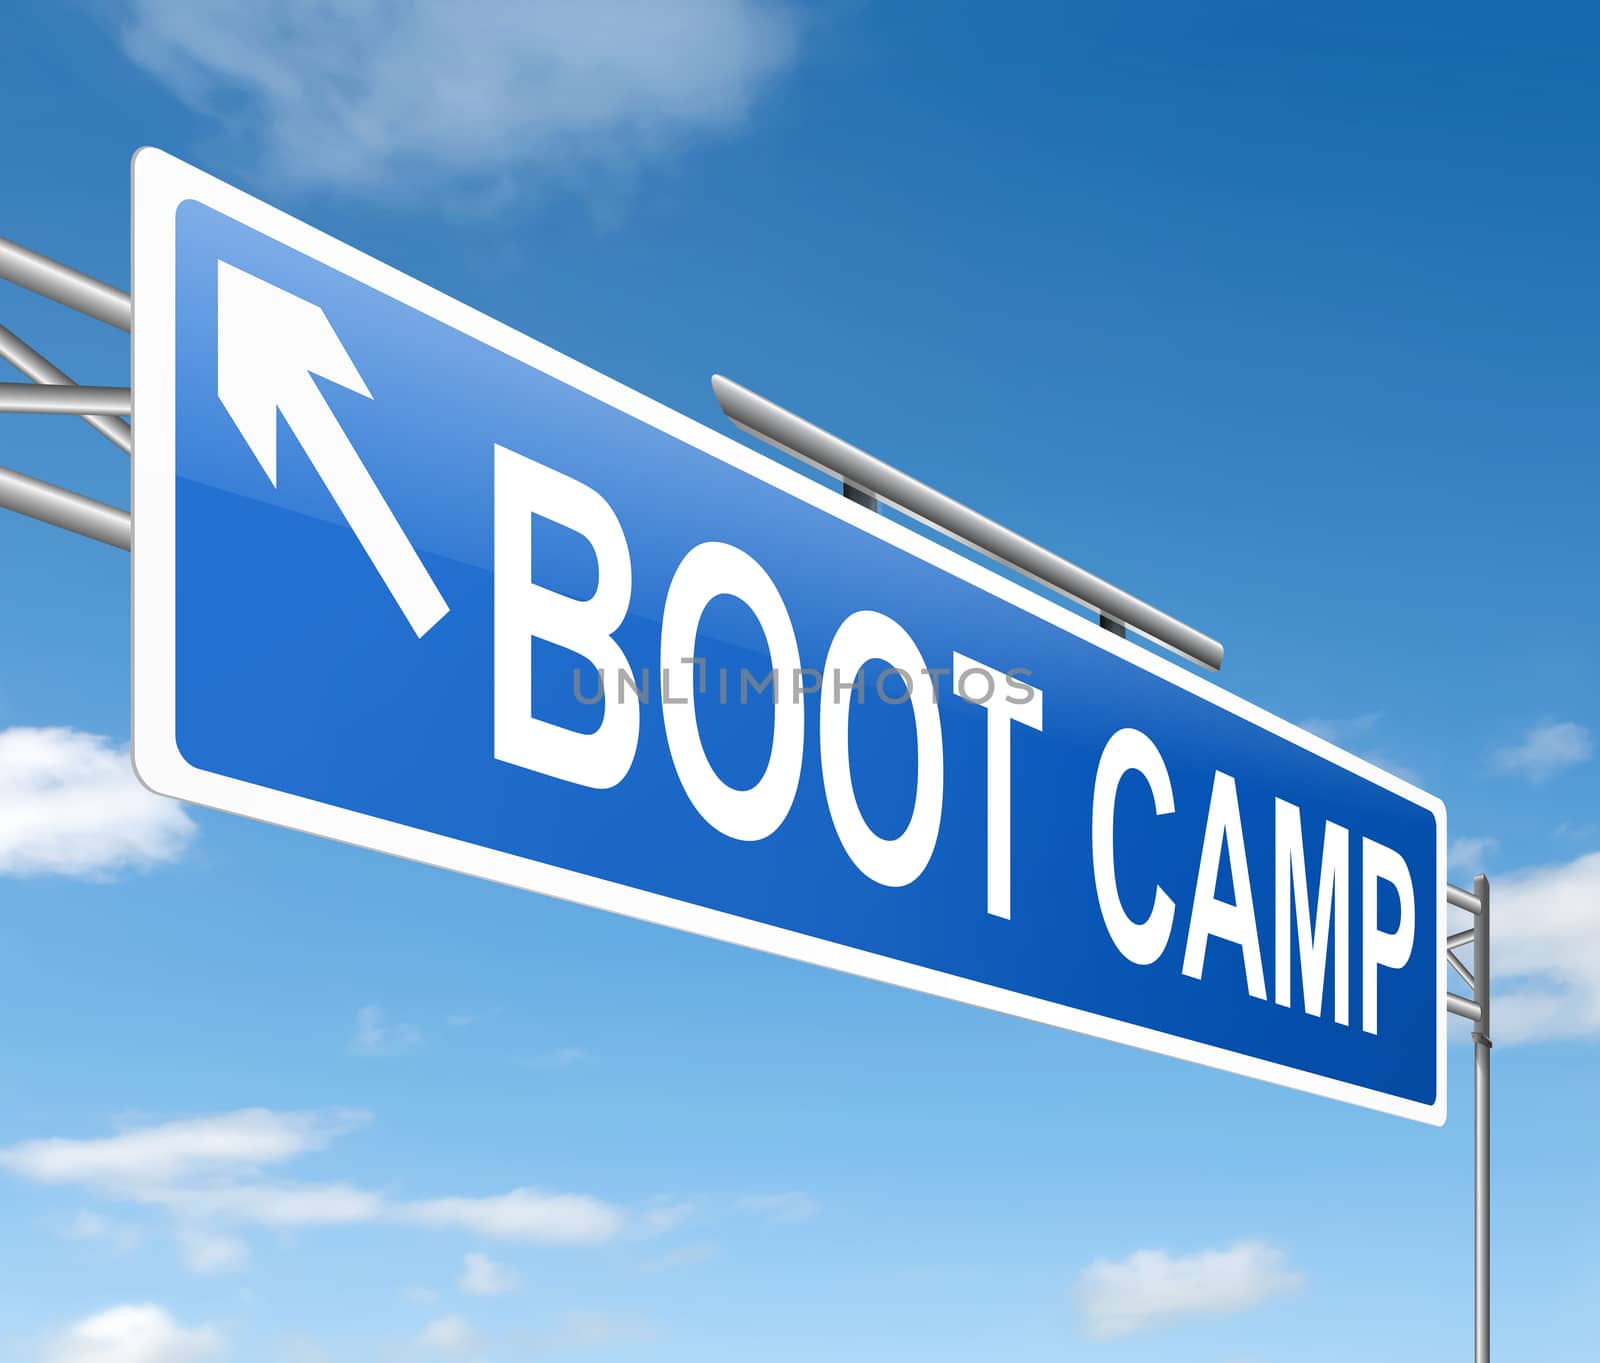 Illustration depicting a sign with a boot camp concept.